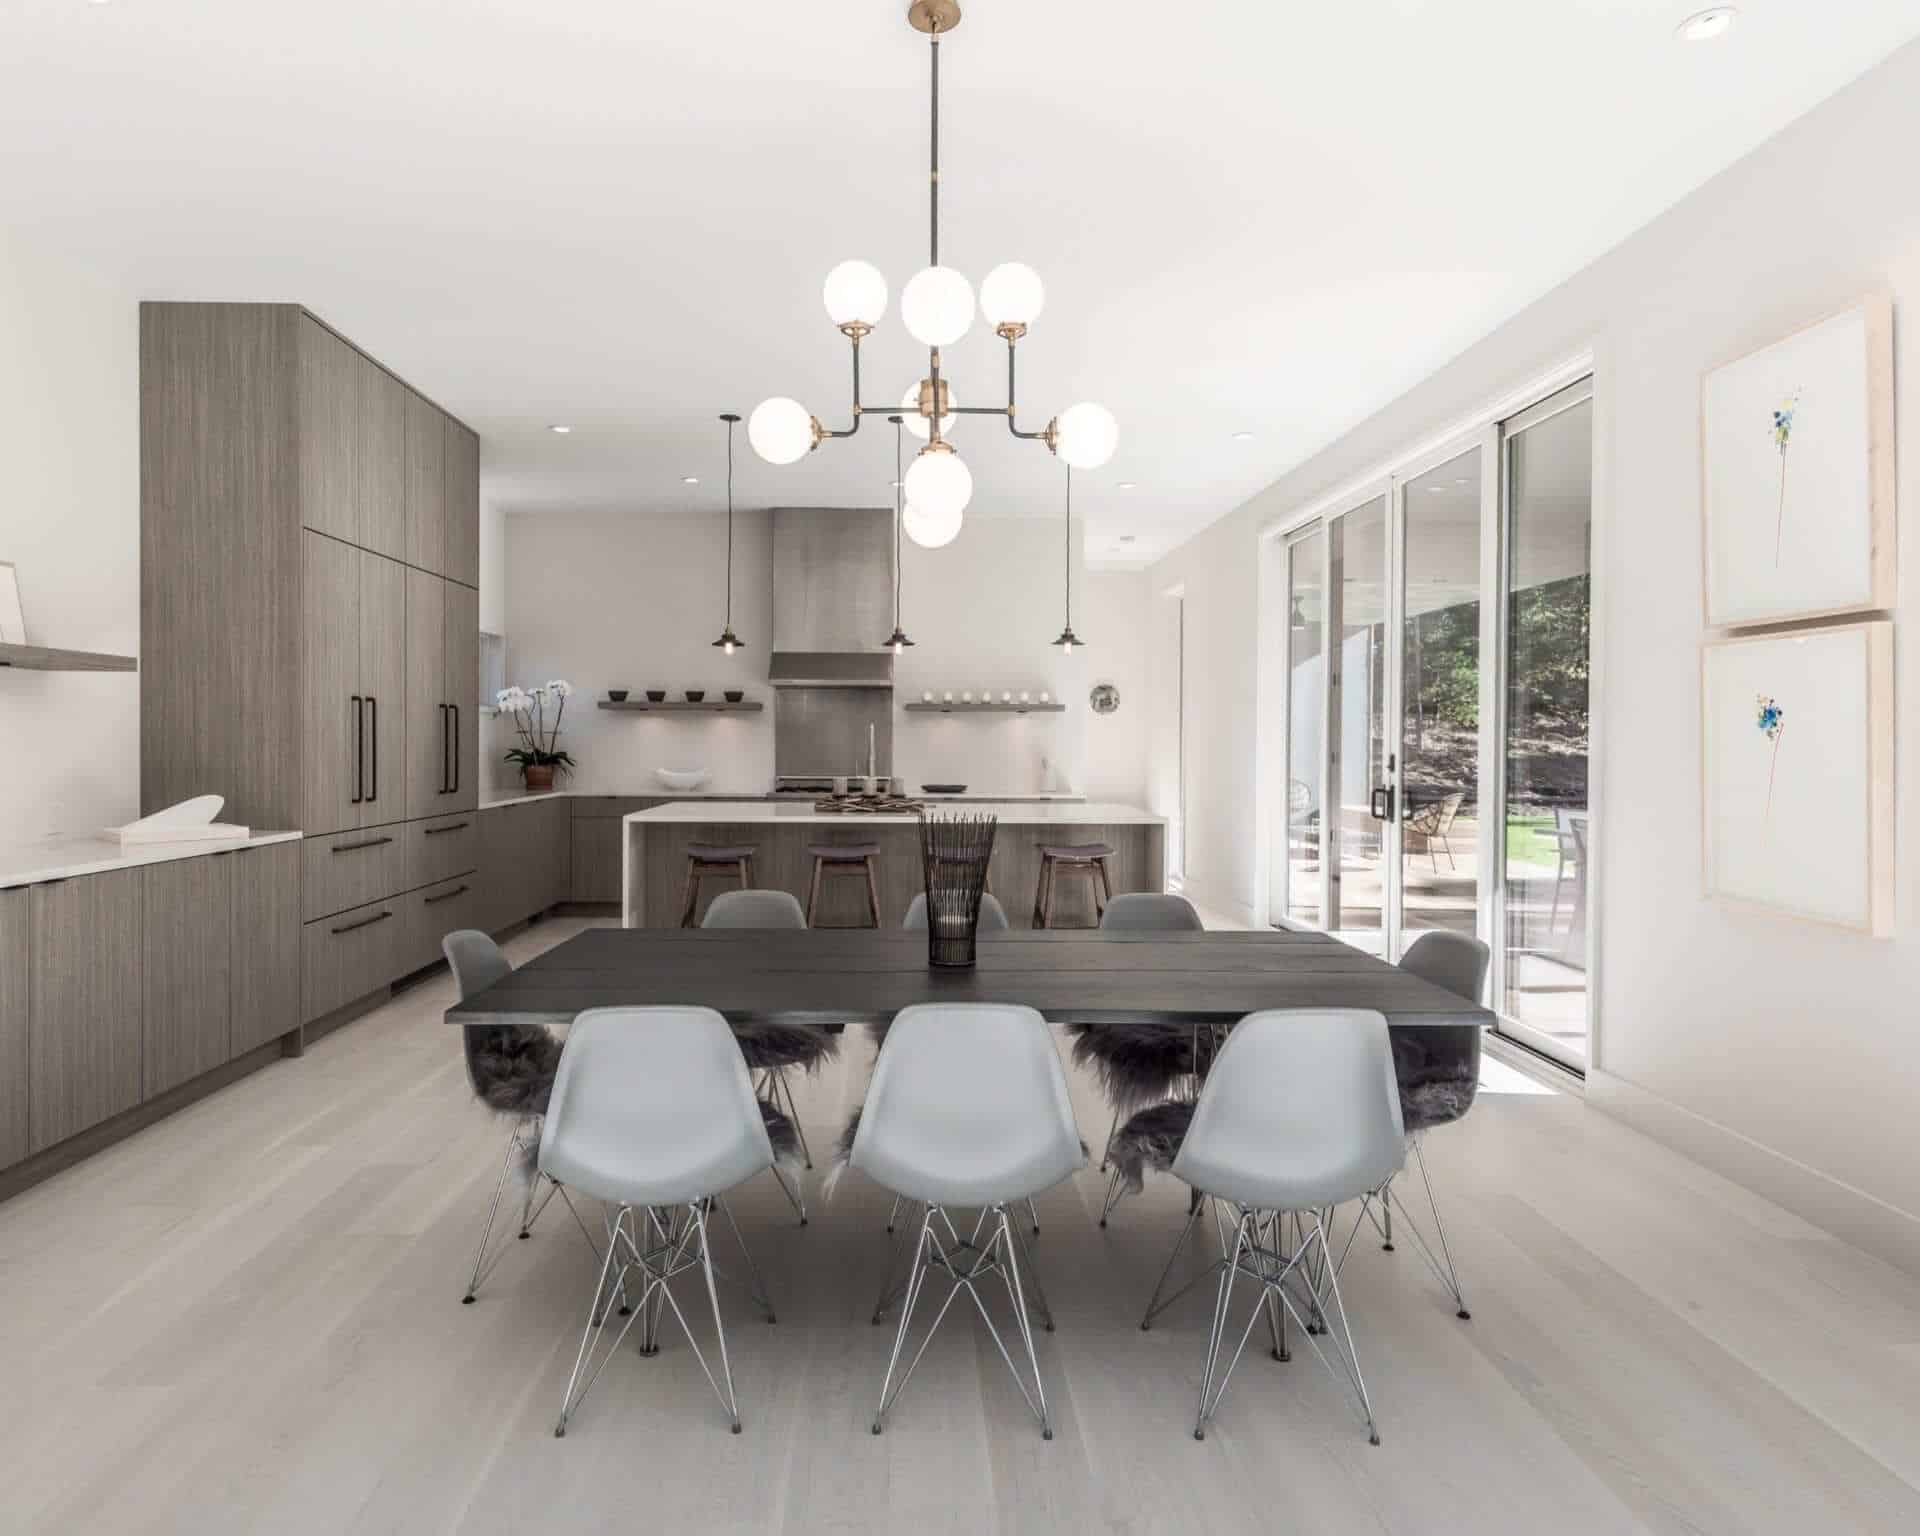 Monochromatic modern kitchen features grey Nantucket vertical laminate Brookhaven cabinetry, custom island and dining area.